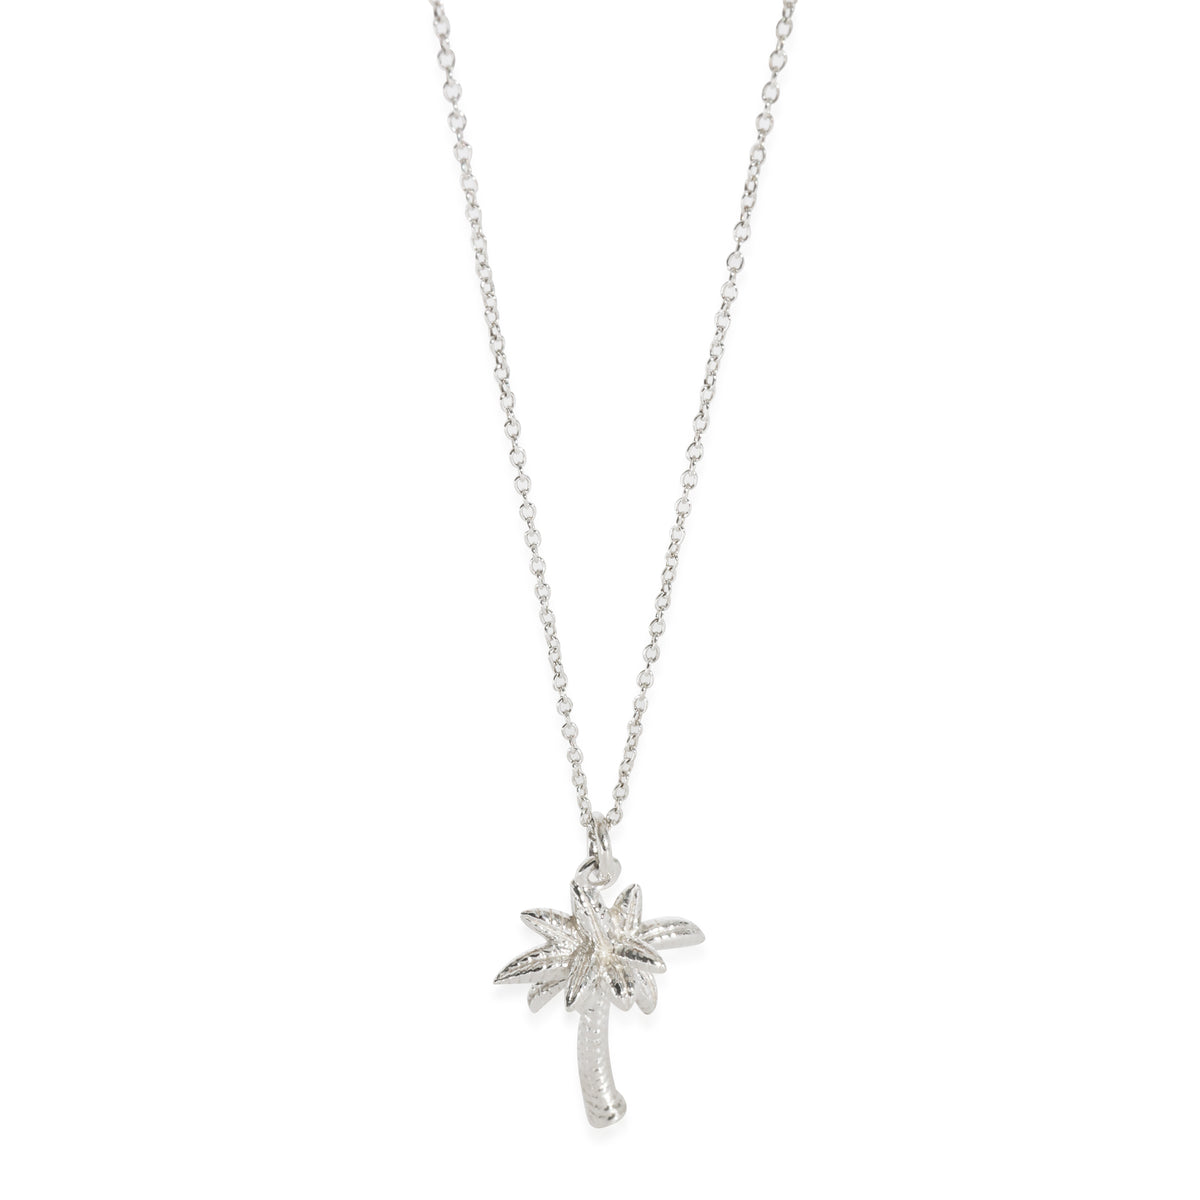 Tiffany & Co. Palm Tree Necklace in Sterling Silver